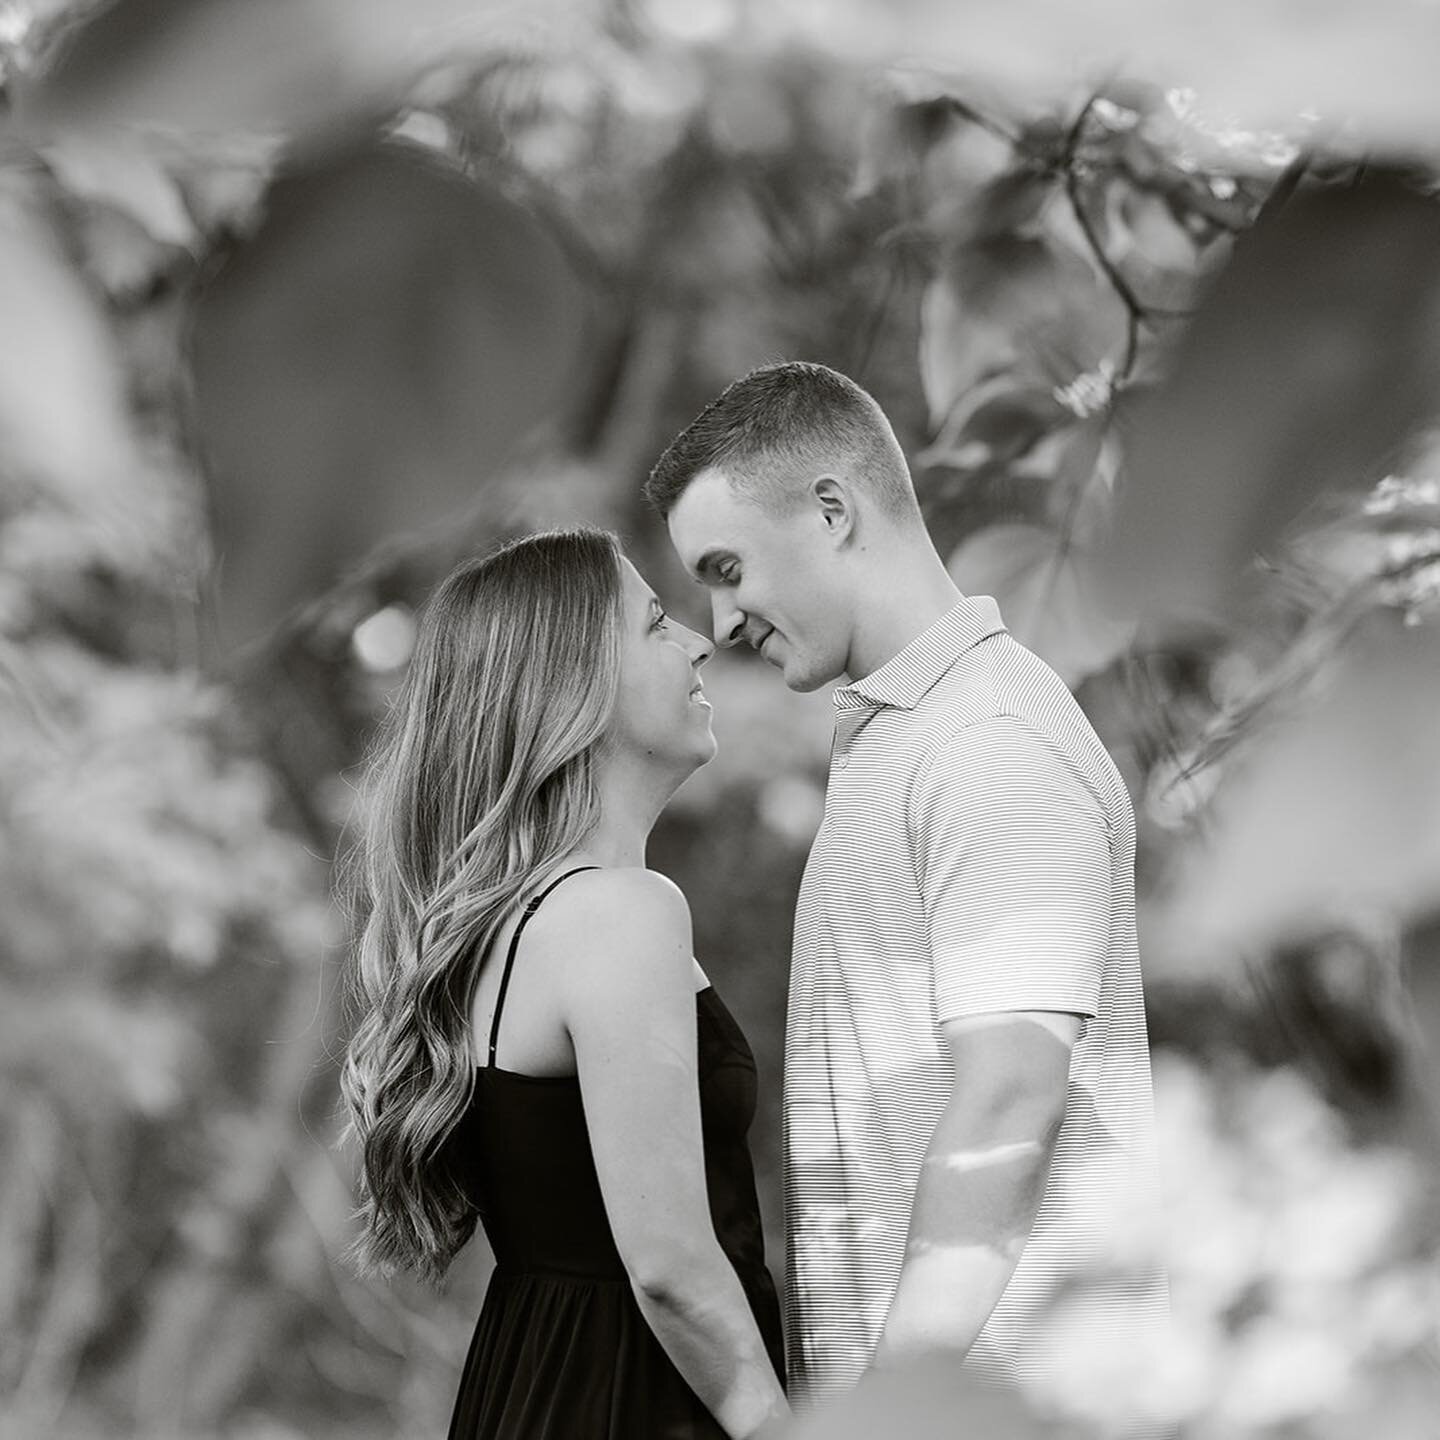 The way these two look at each other 🤩 // Michaela &amp; Bradley in black &amp; white // @cranbrookhouseandgardens 
.
.
.
#cranbrook #detroitweddingphotographer #detroitengagementphotographer #michiganweddingphotographer #michiganengagementphotograp